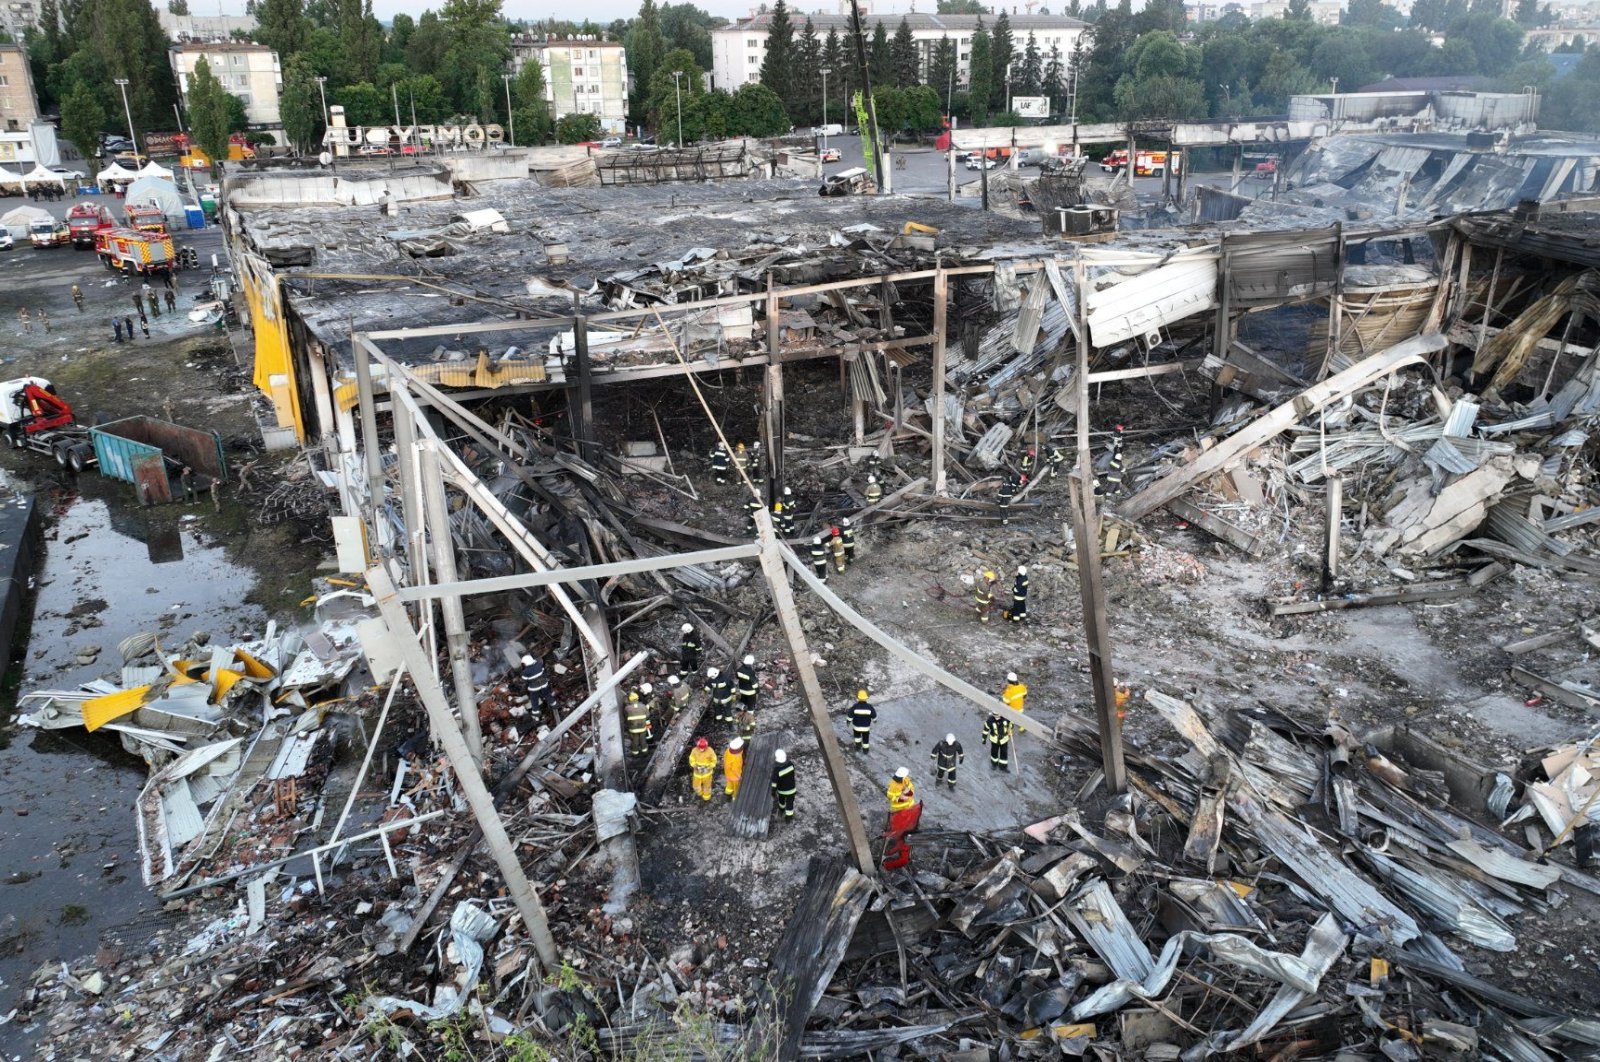 Rescuers work in the wreckage of a mall the day after it was hit by a Russian missile strike according to Ukrainian authorities, Kremenchuk, central Ukraine, June 28, 2022. (Photo by Ukrainian State Emergency Service Press Service via AFP)